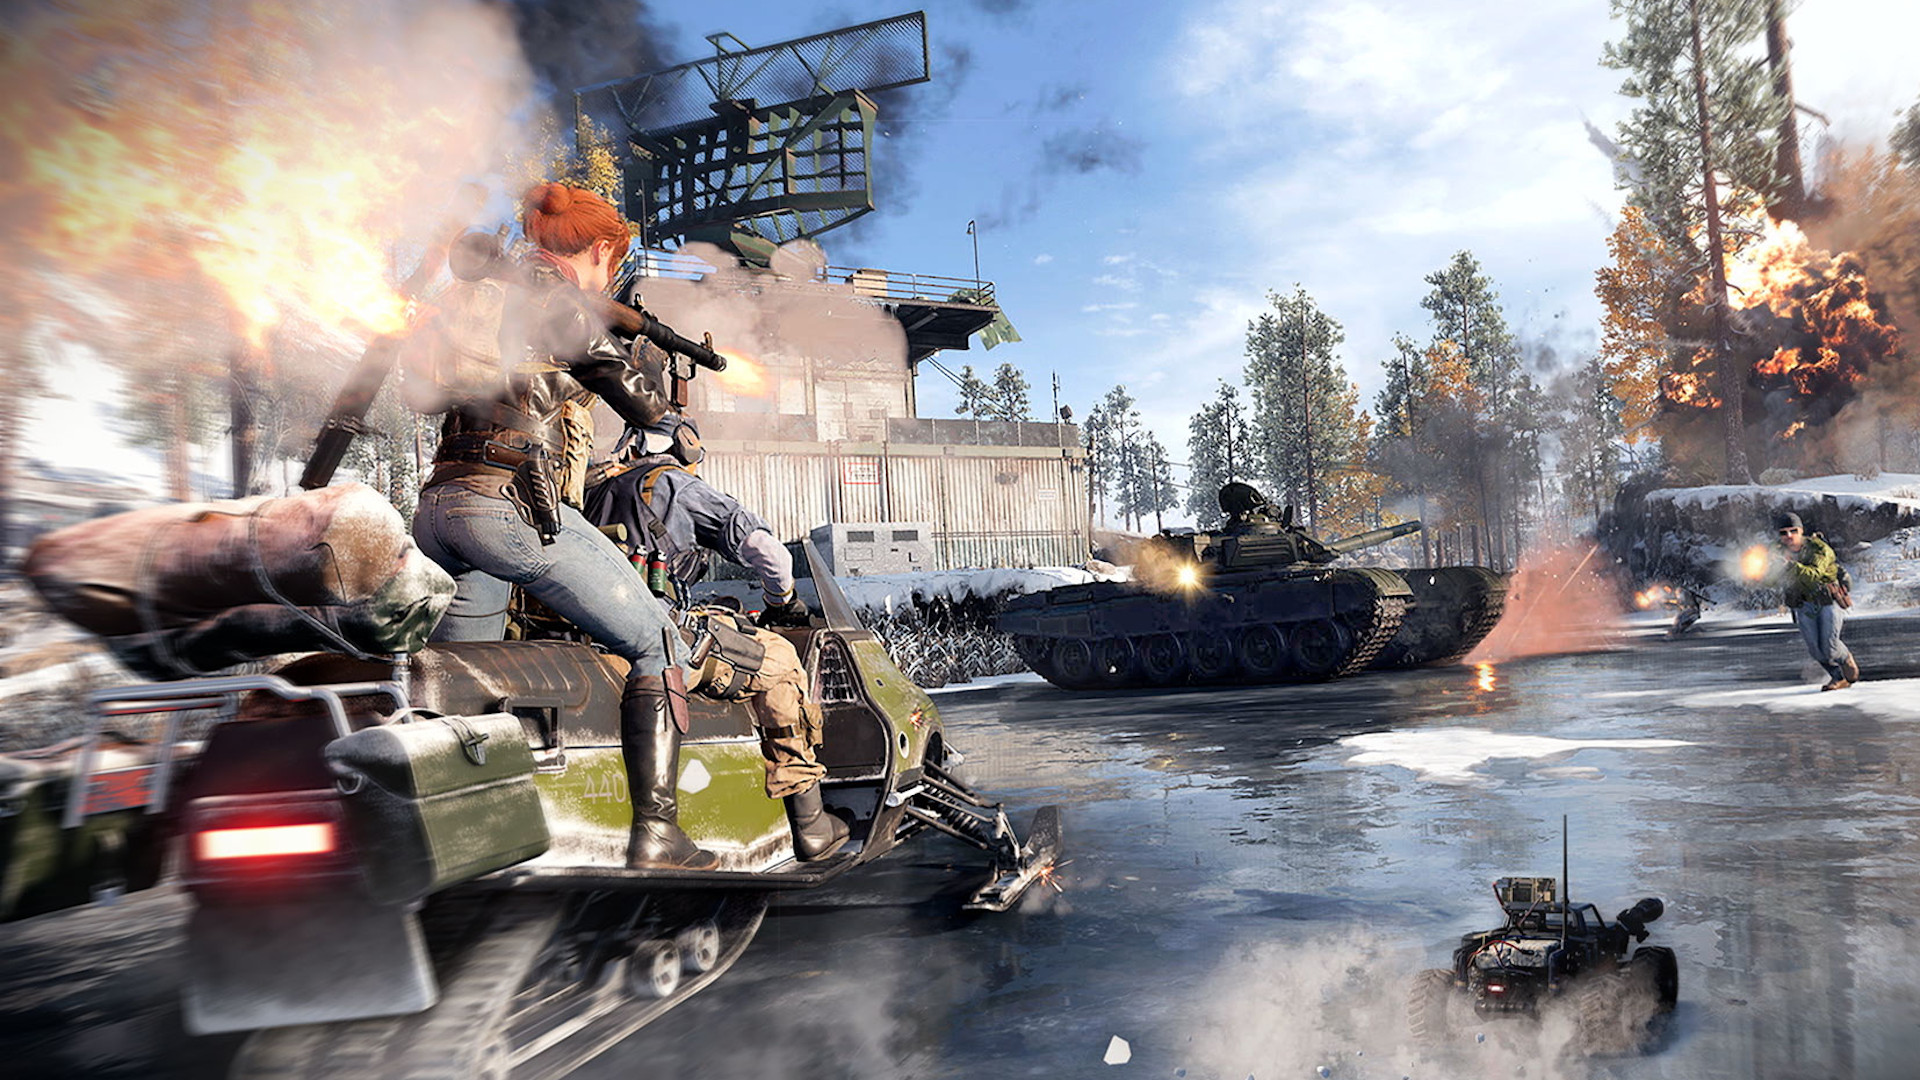 Call of Duty Black Ops Cold War multiplayer maps: Characters riding and firing from the back of a snowmobile, with a tank directly ahead.